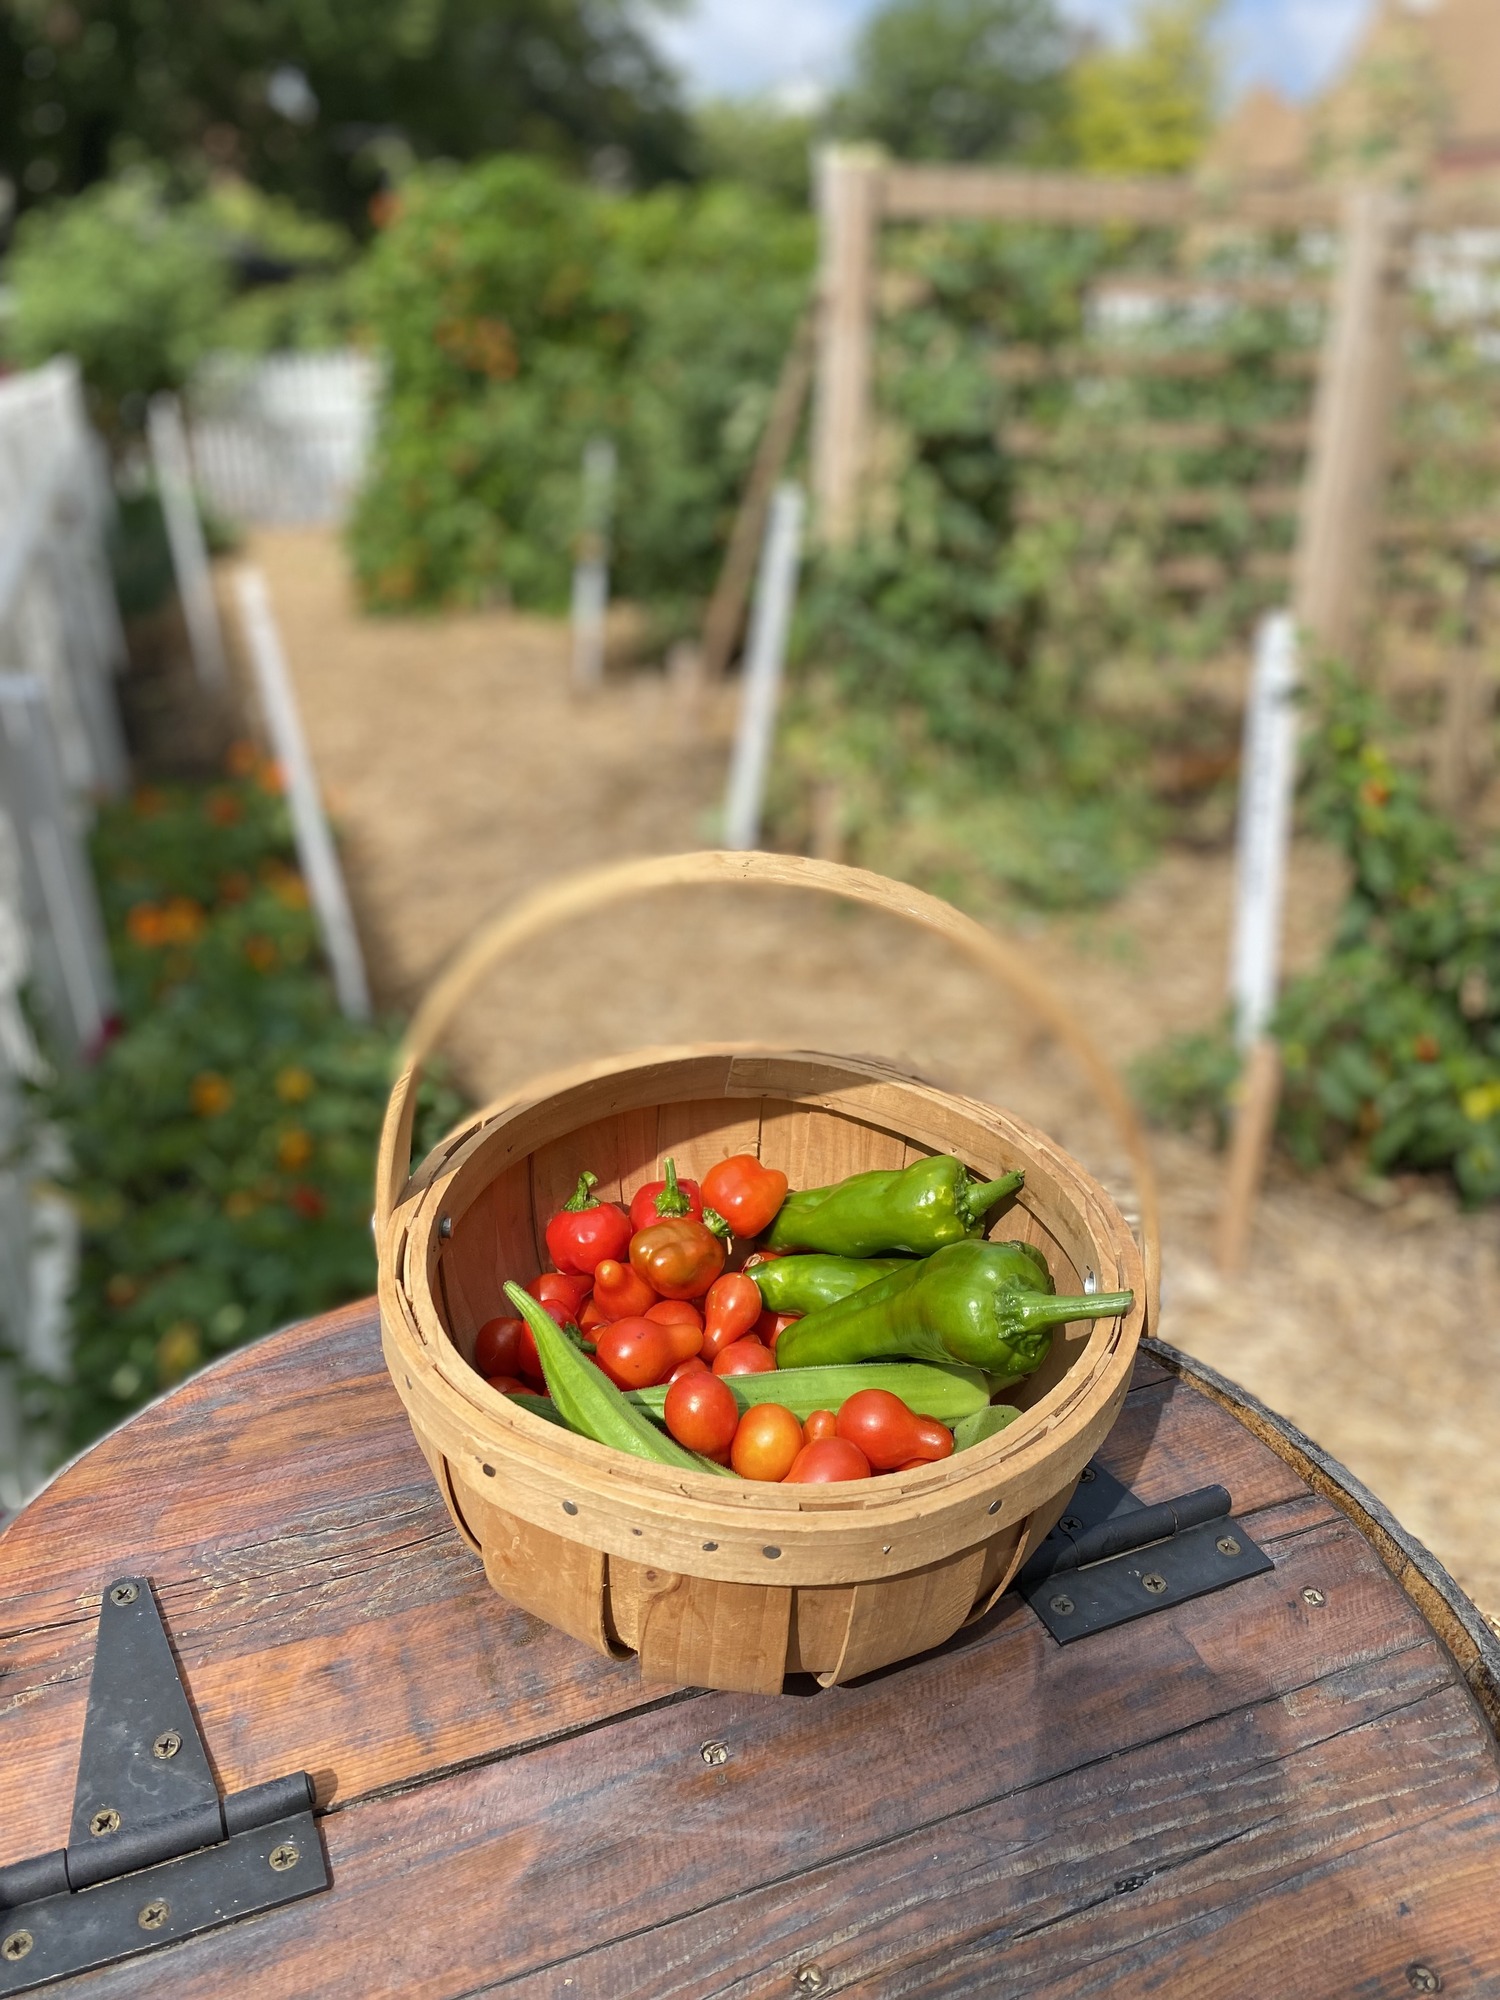 A basket of tomatoes and red and green peppers harvest from the garden.